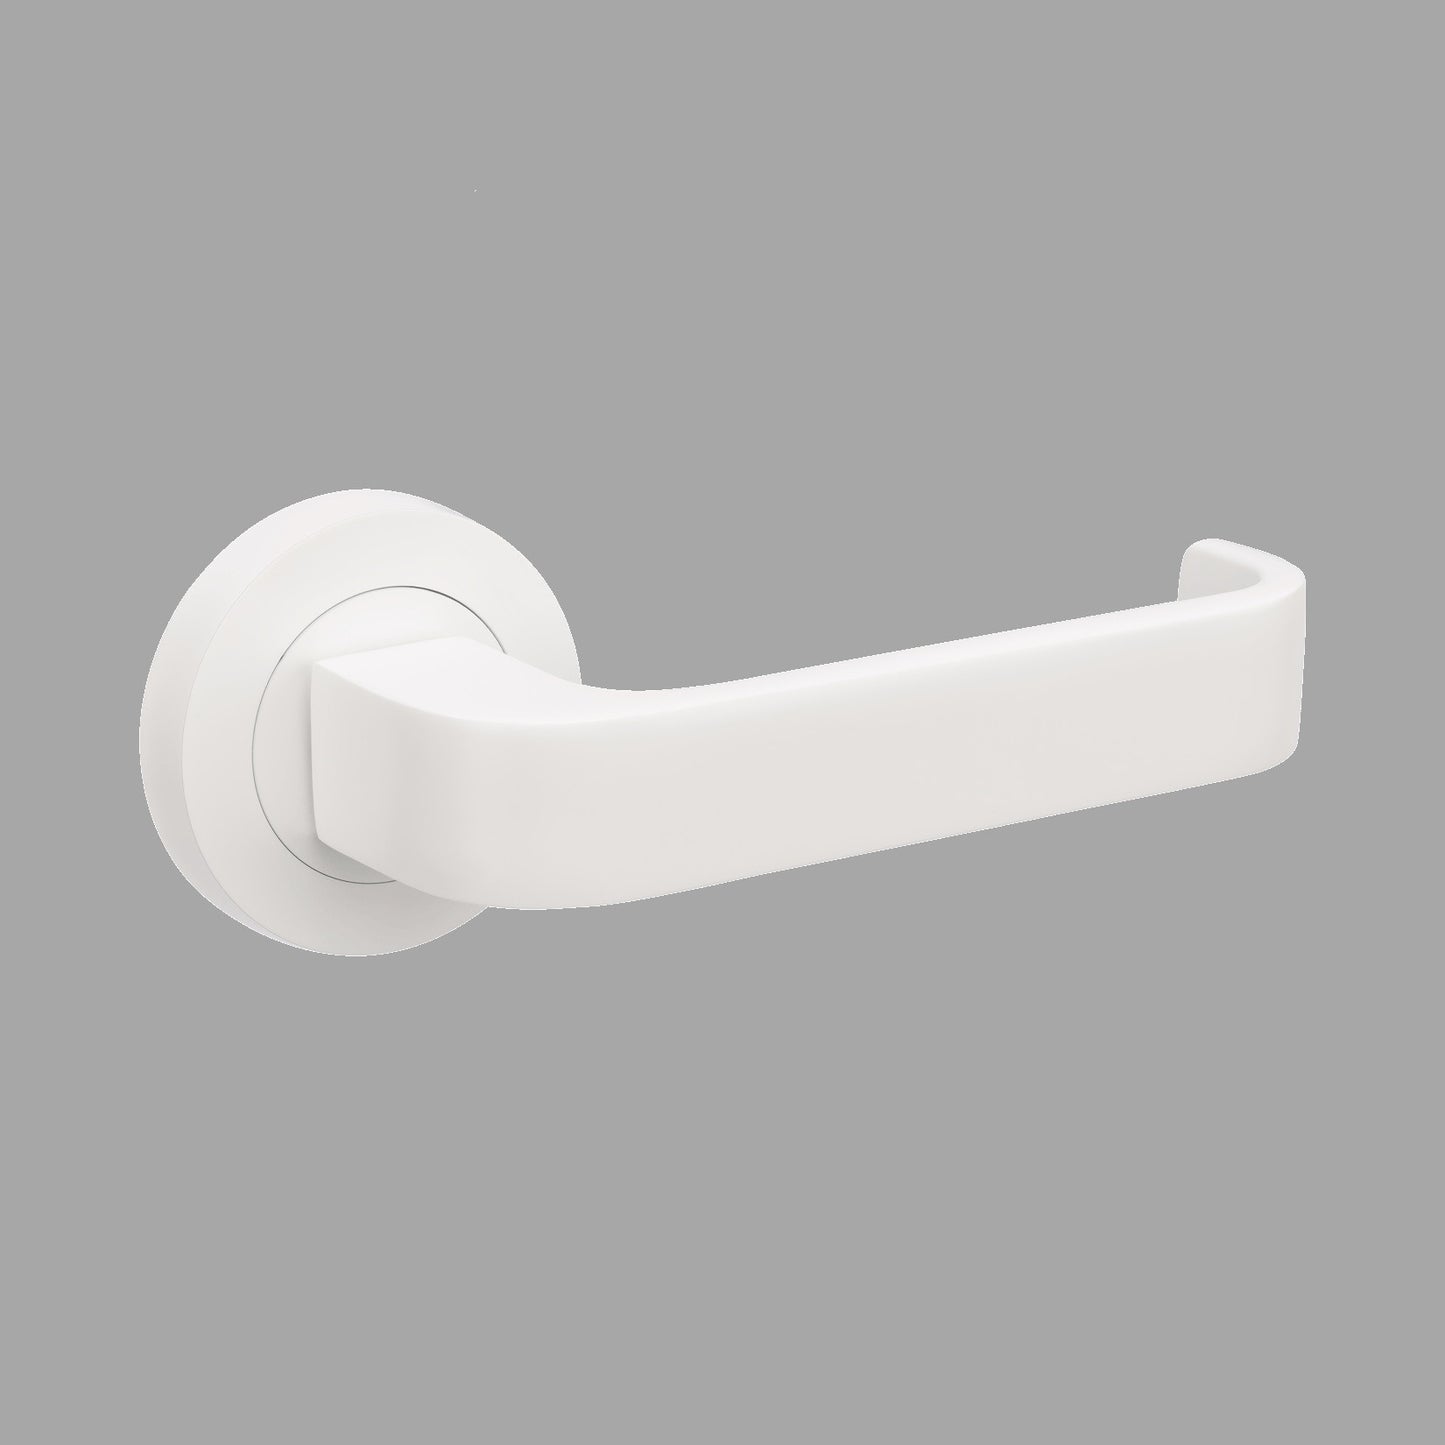 Up close product picture of the Streamline White Door Handle on a grey background.